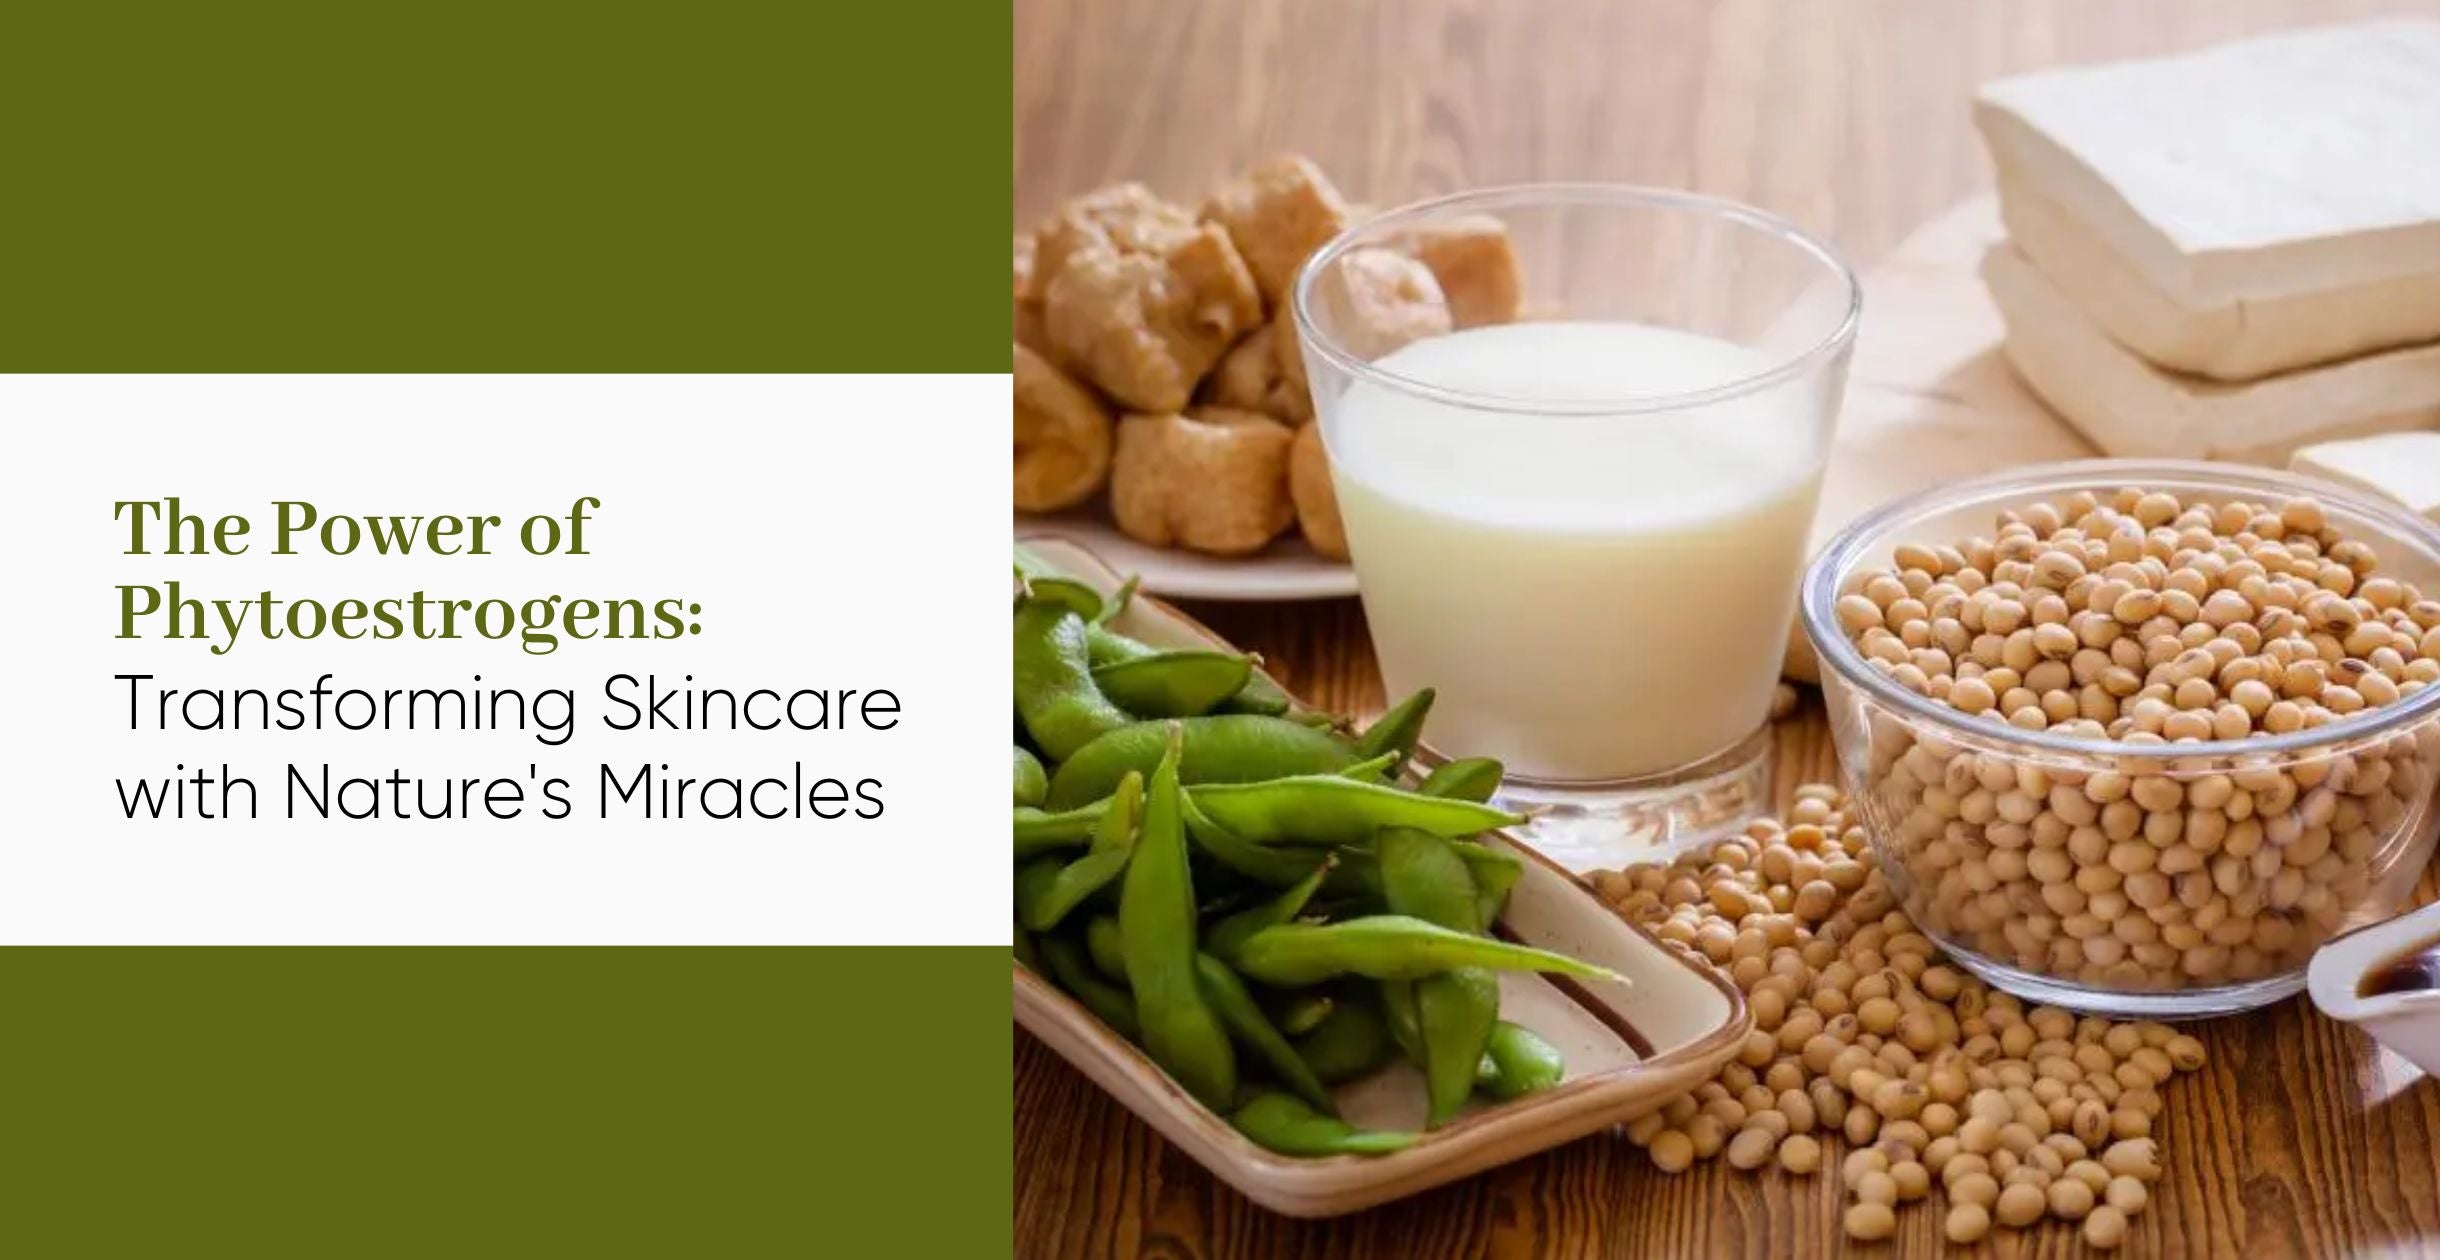 The Power of Phytoestrogens: Transforming Skincare with Nature's Miracles